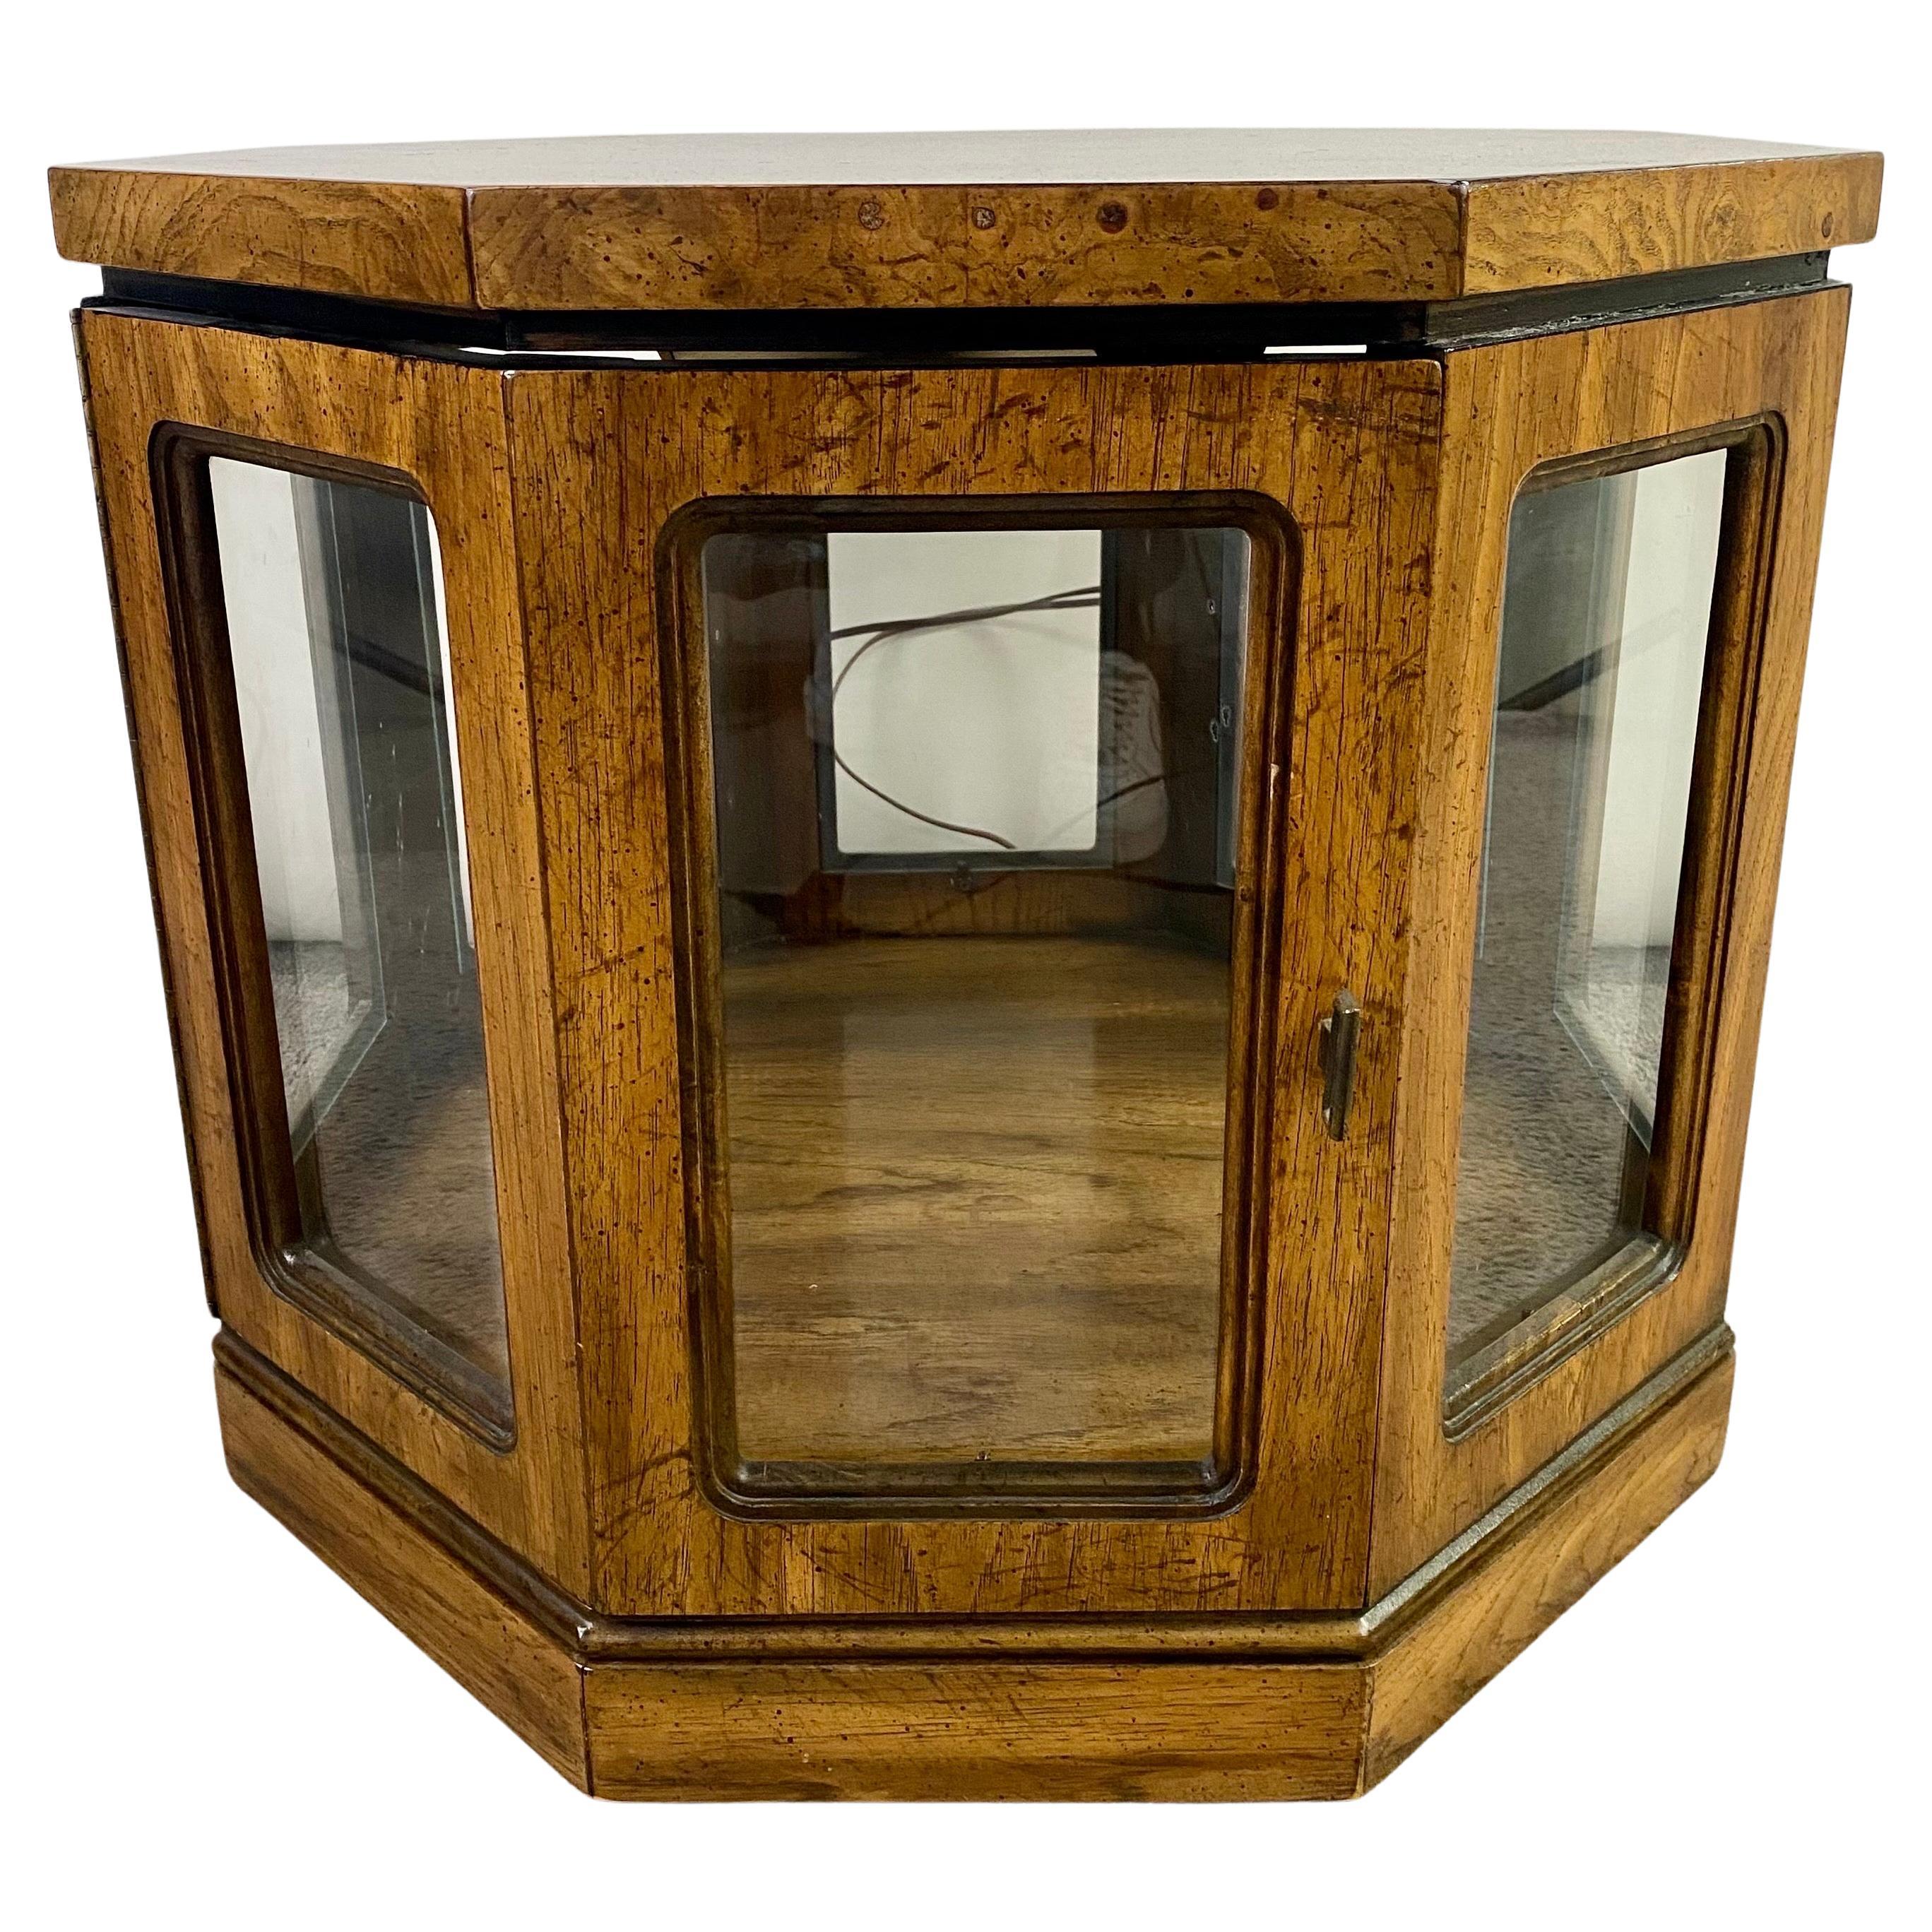 A mid-century modern pair of end or side tables in a hexagon shape. The quality tables are crafted of budwood and are sturdy. the MCM tables feature glass sides with one door opening and offering space for displaying items inside. Each are equipped